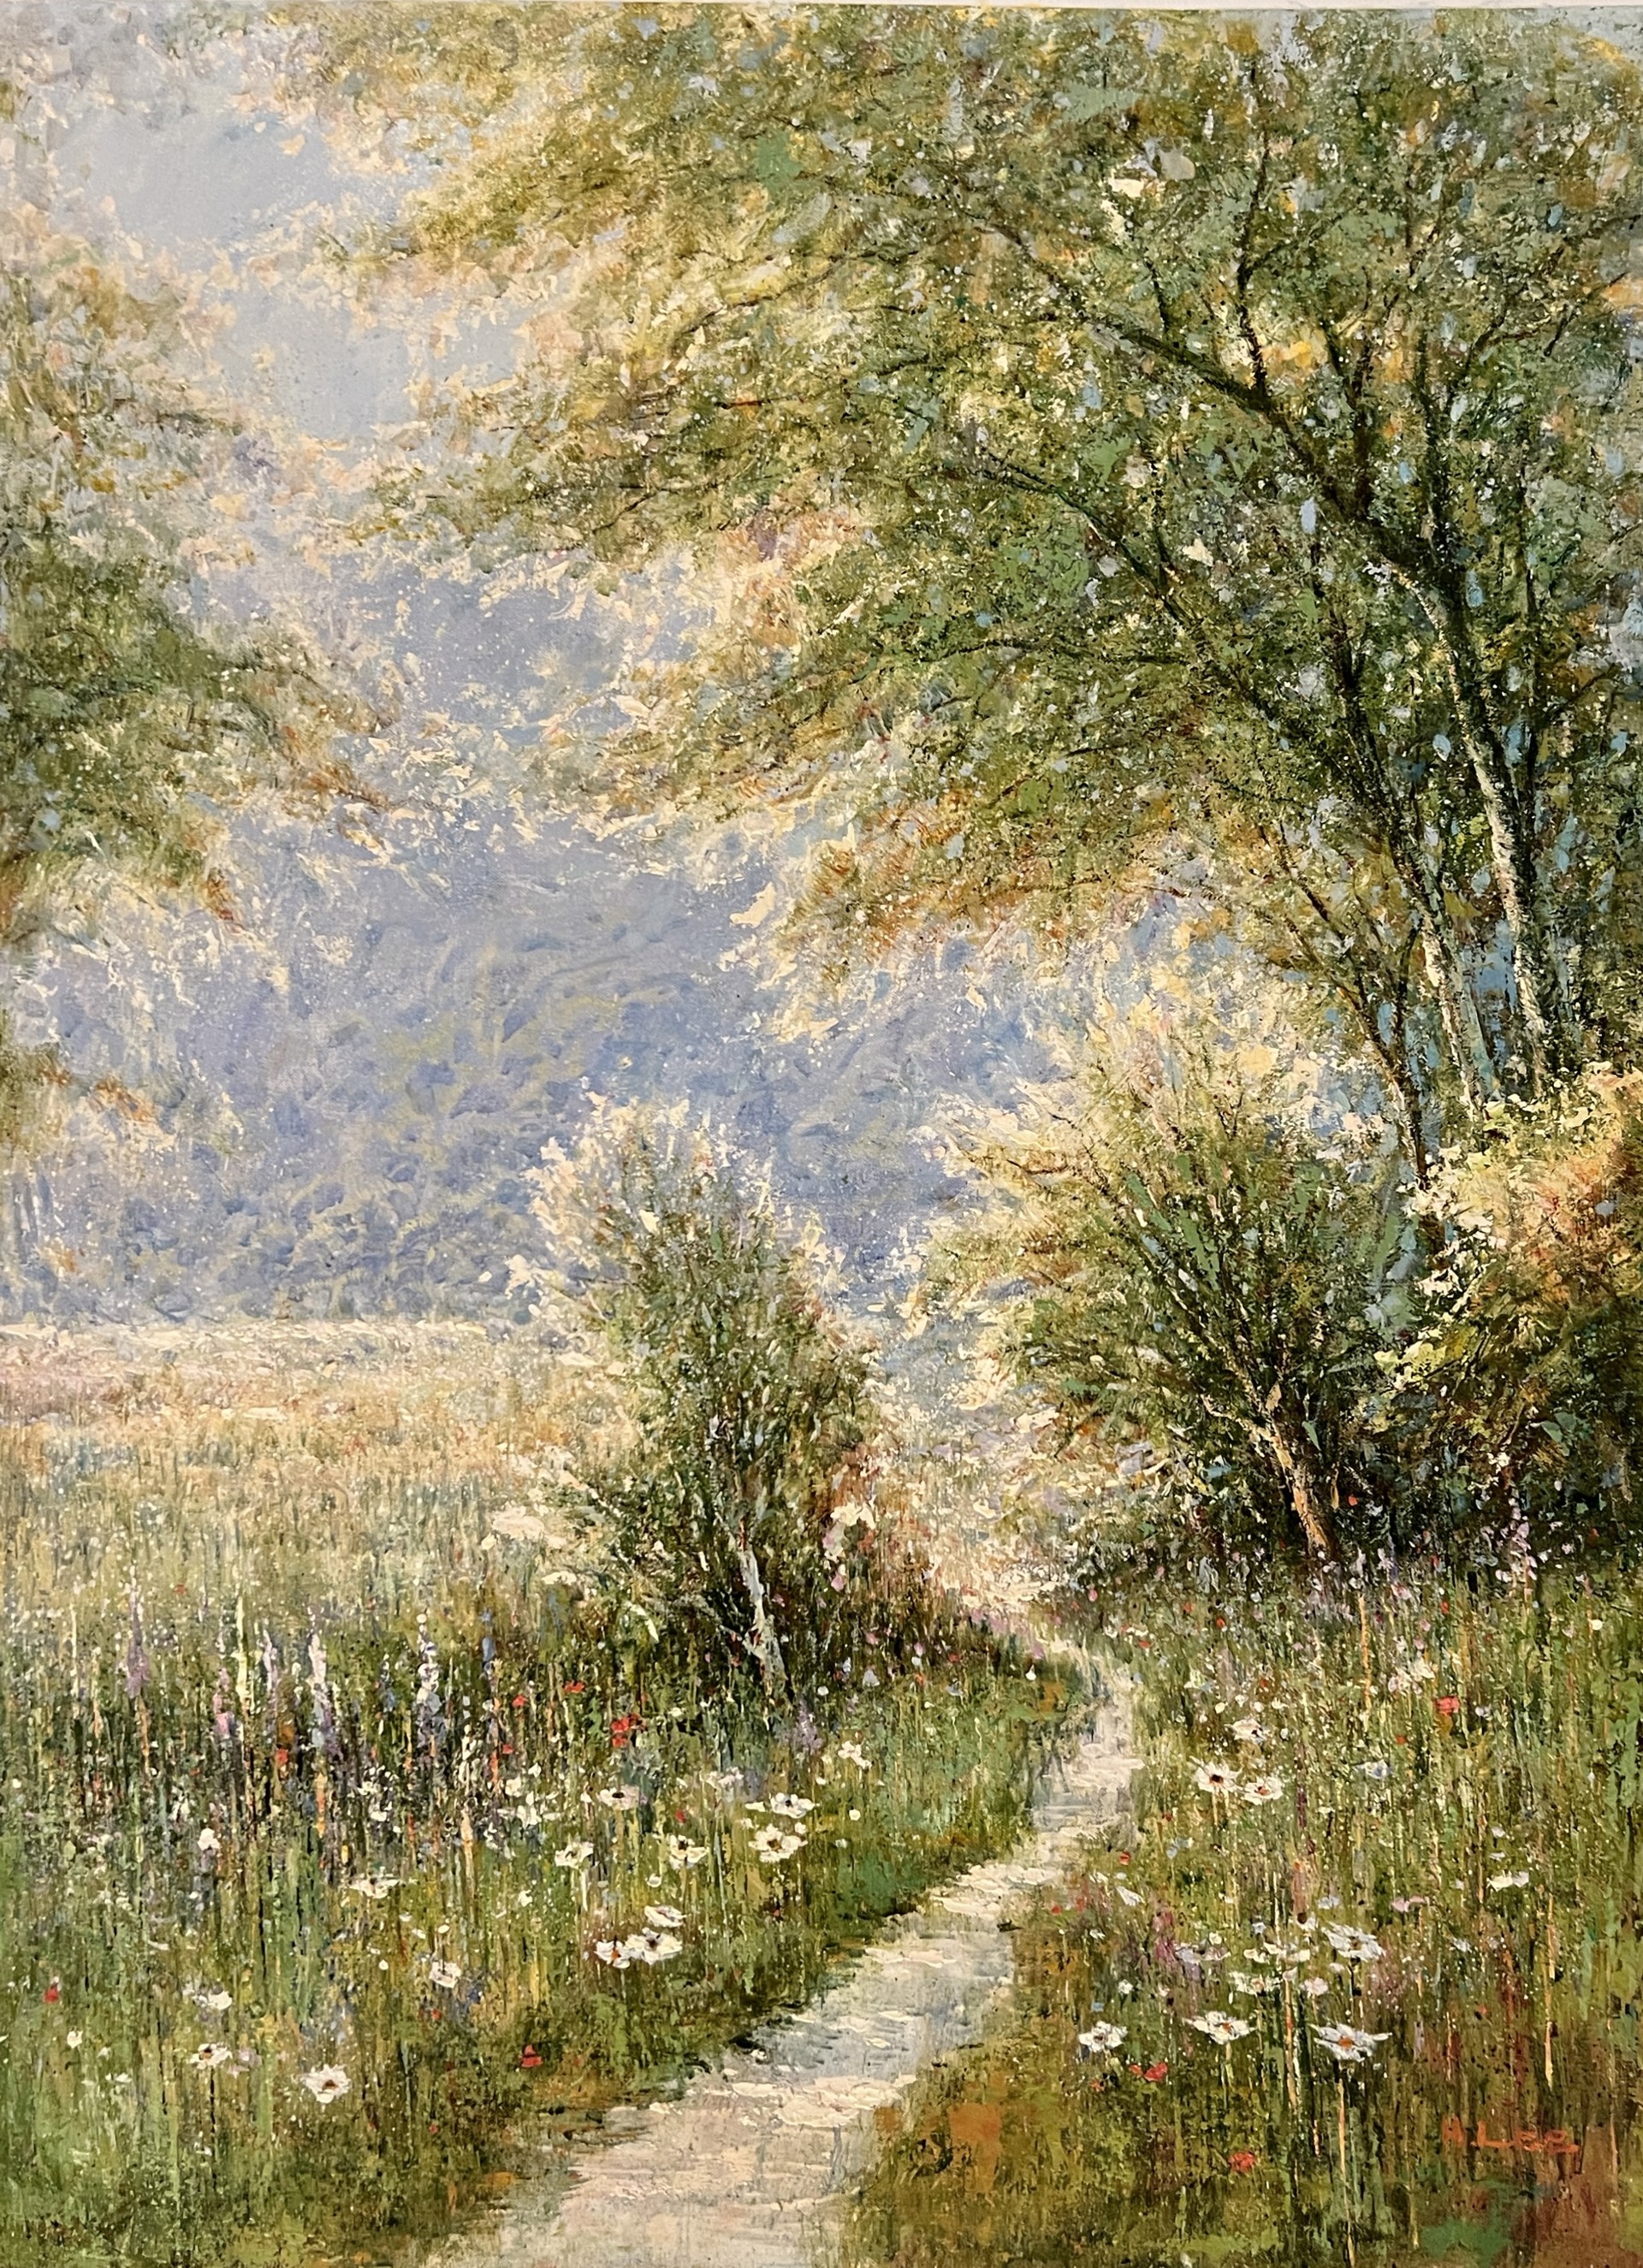 TRAIL ON THE VALLEY FLOOR by H LEE